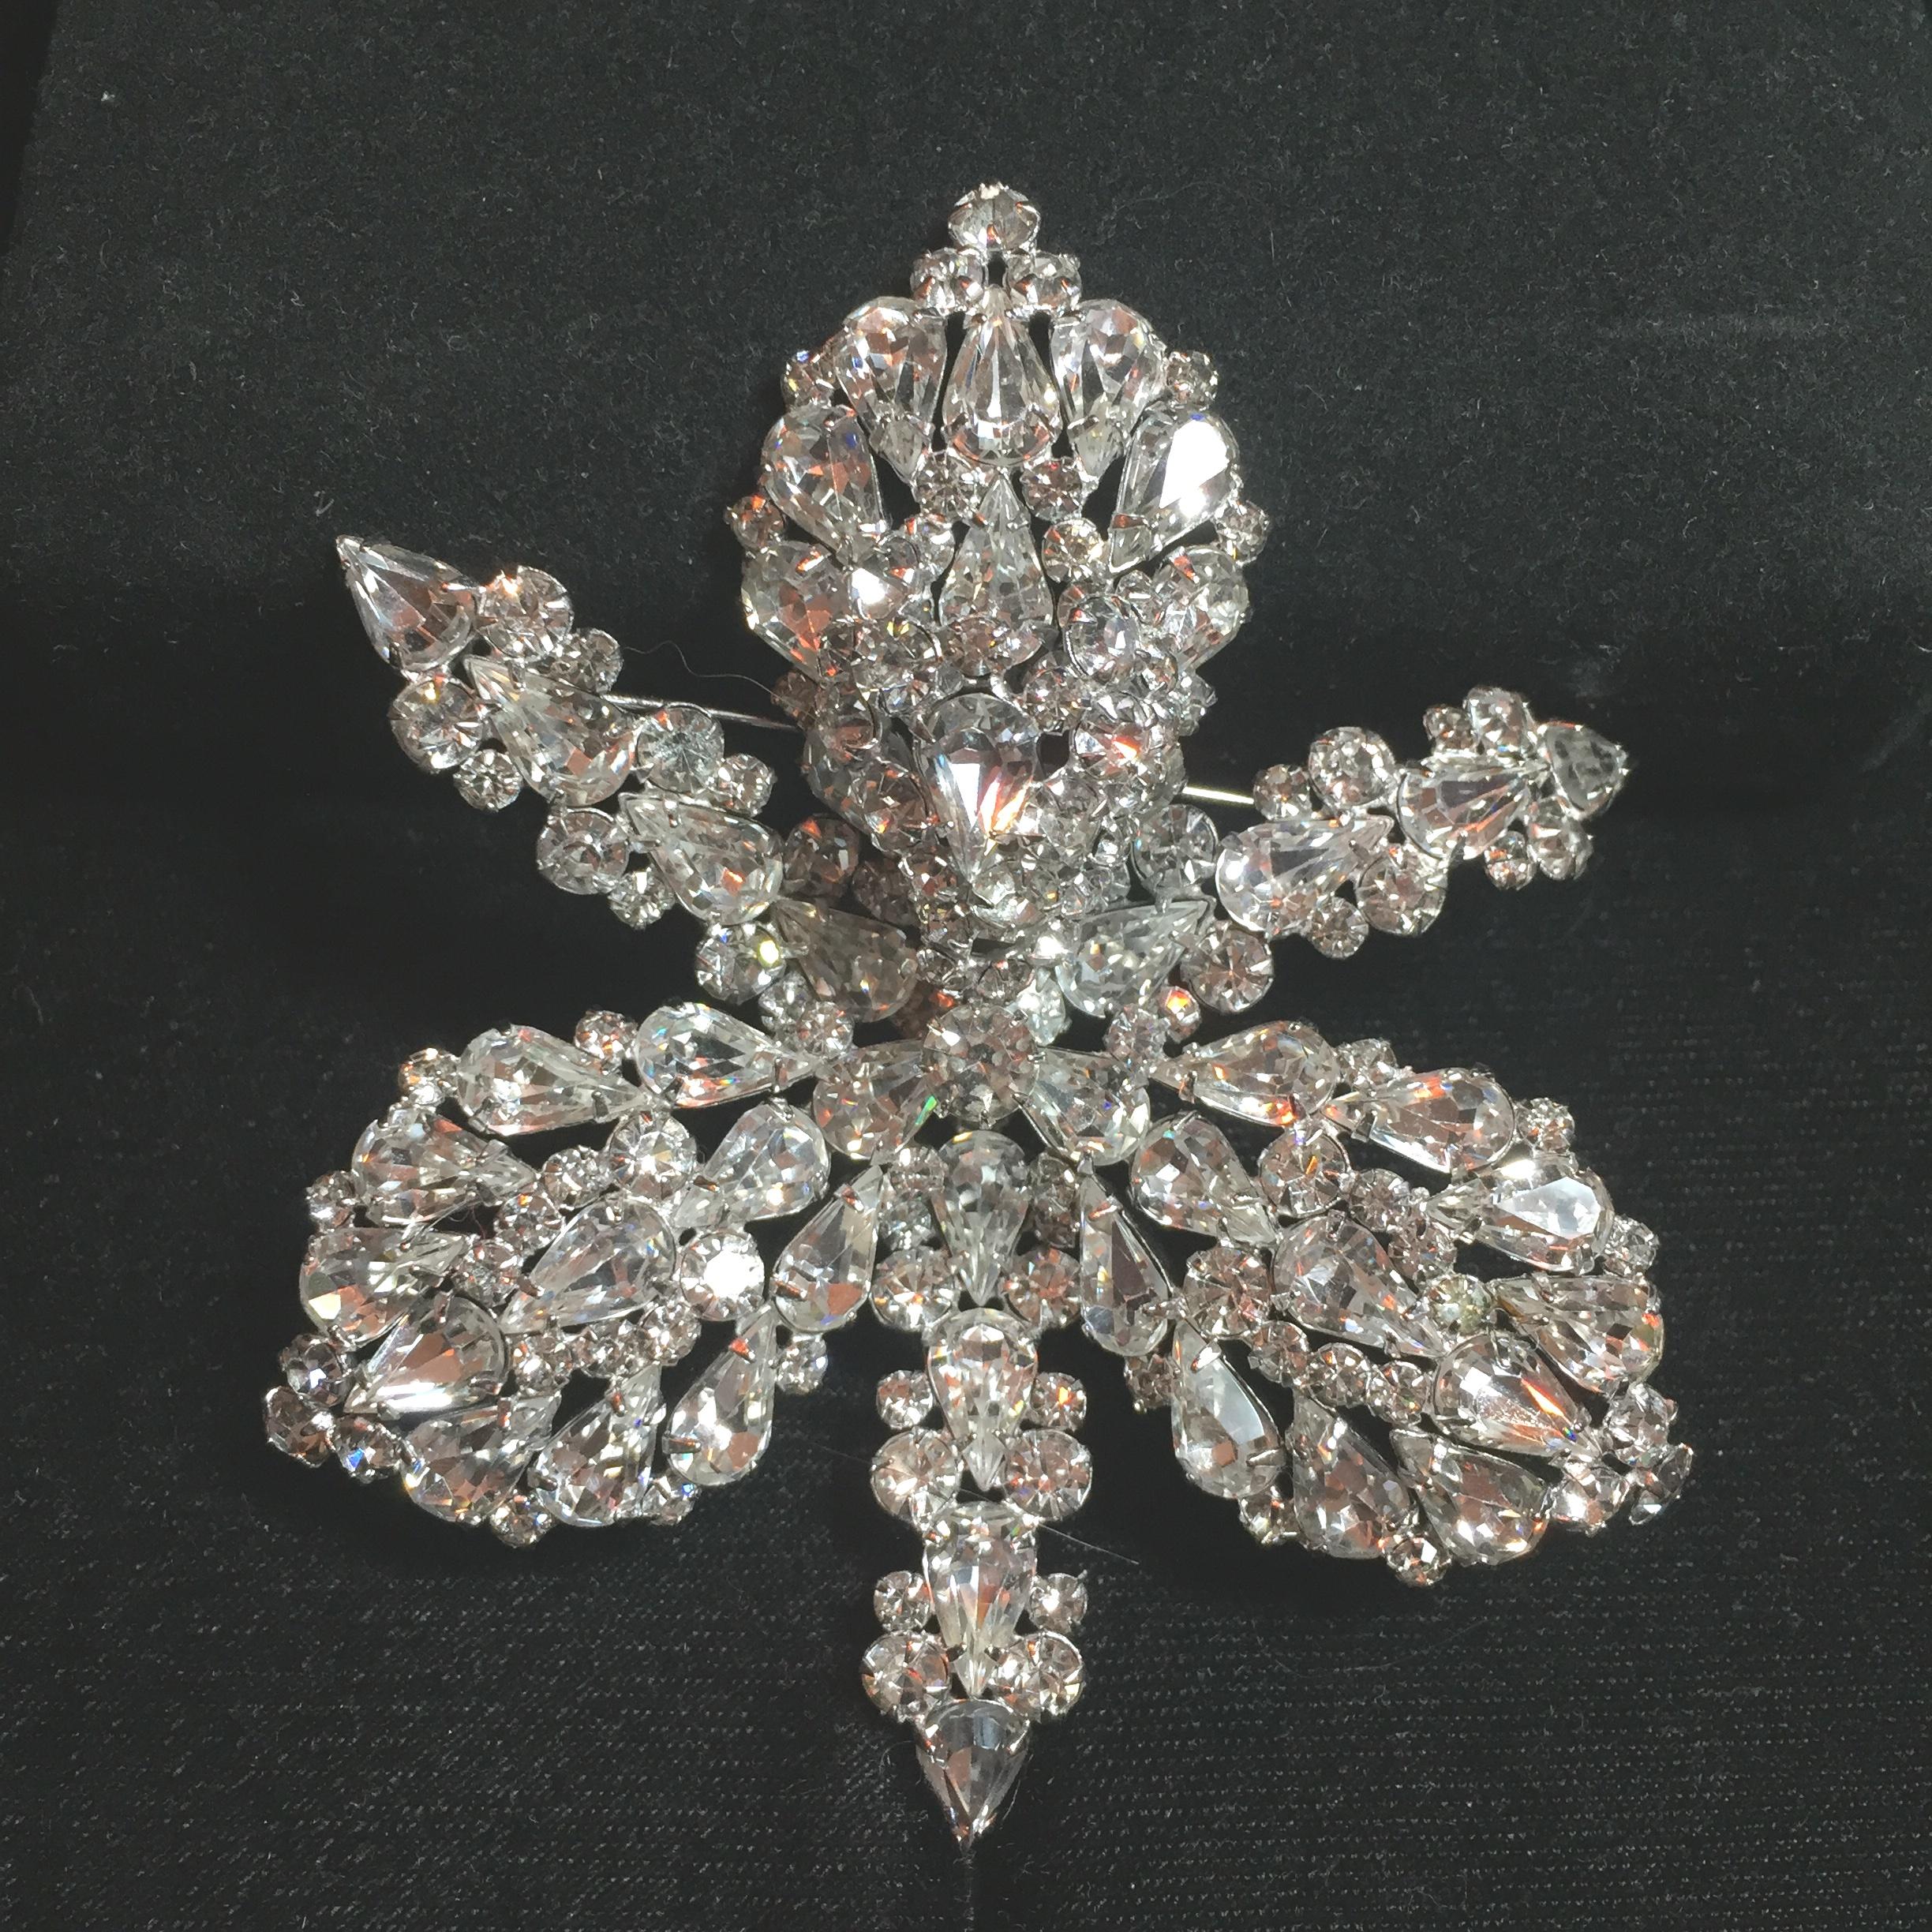 Offered here is a massive Elsa Schiaparelli rhodium-plated brooch and matching clip-back earrings from the 1950s. The exquisitely engineered hand-soldered three-dimensional design is that of a three-lobed orchid blossom hand-set with hundreds of